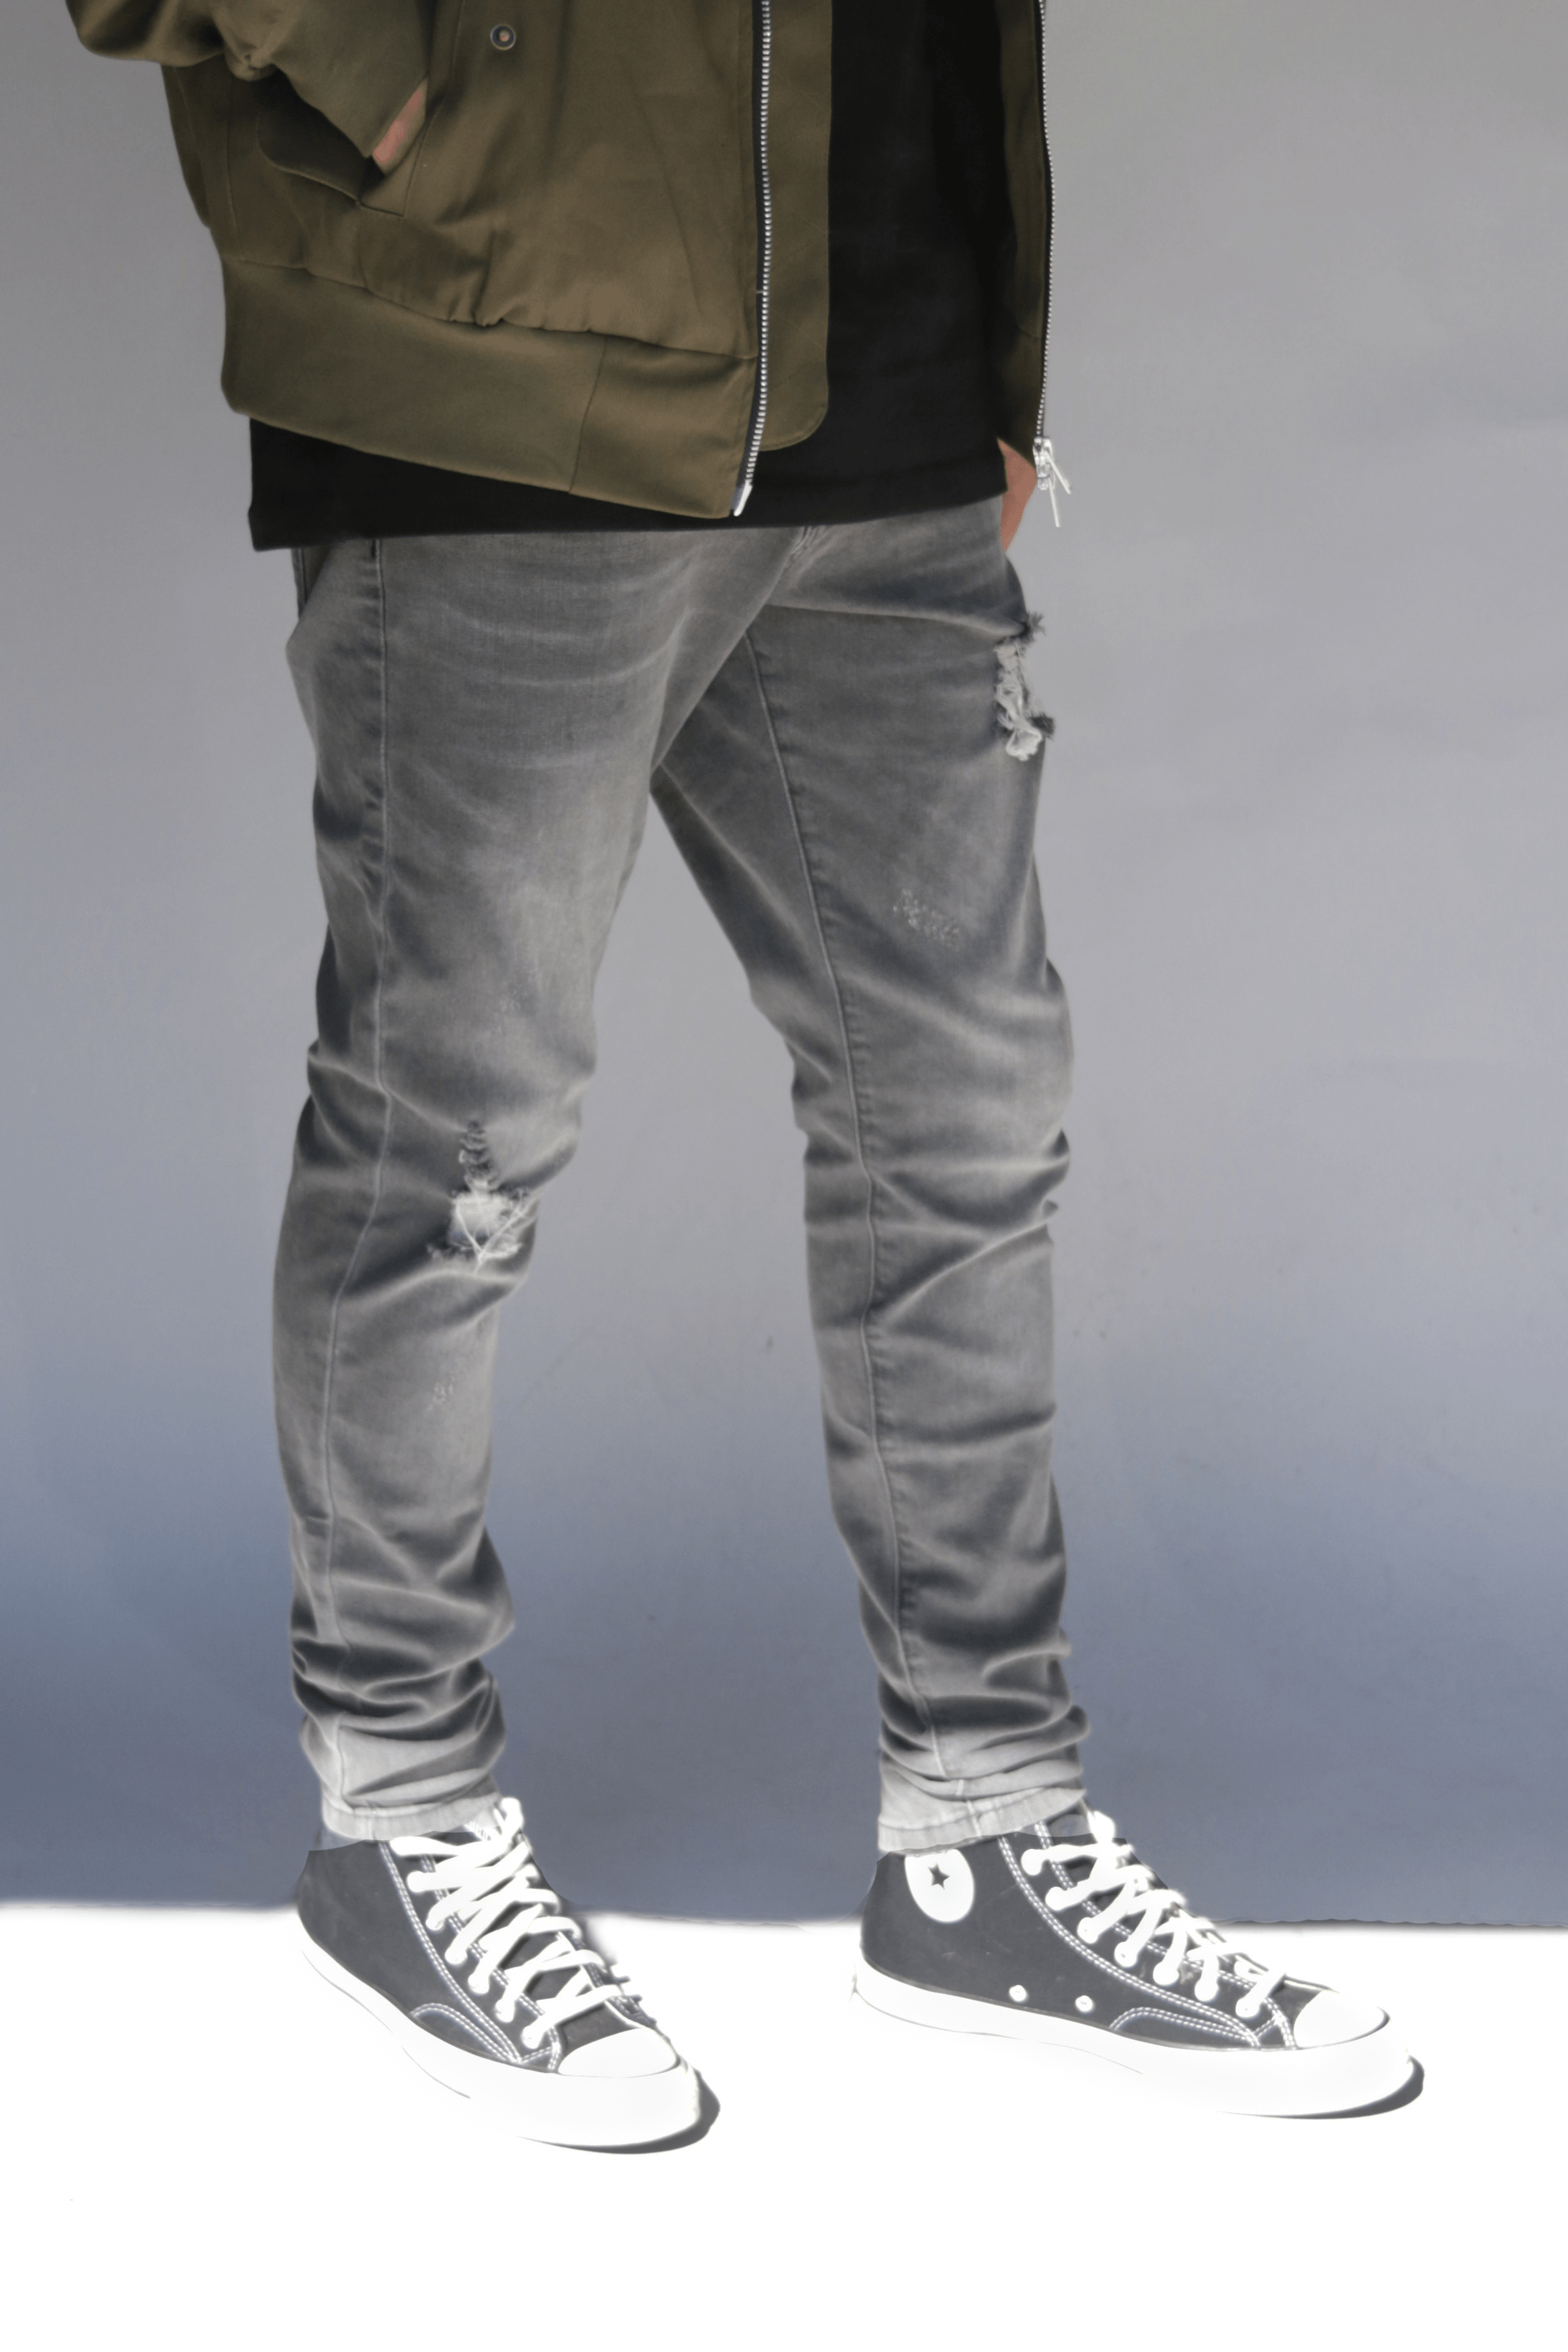 Stonewashed Distressed Gray Denim Jeans (08.26.21 Release)